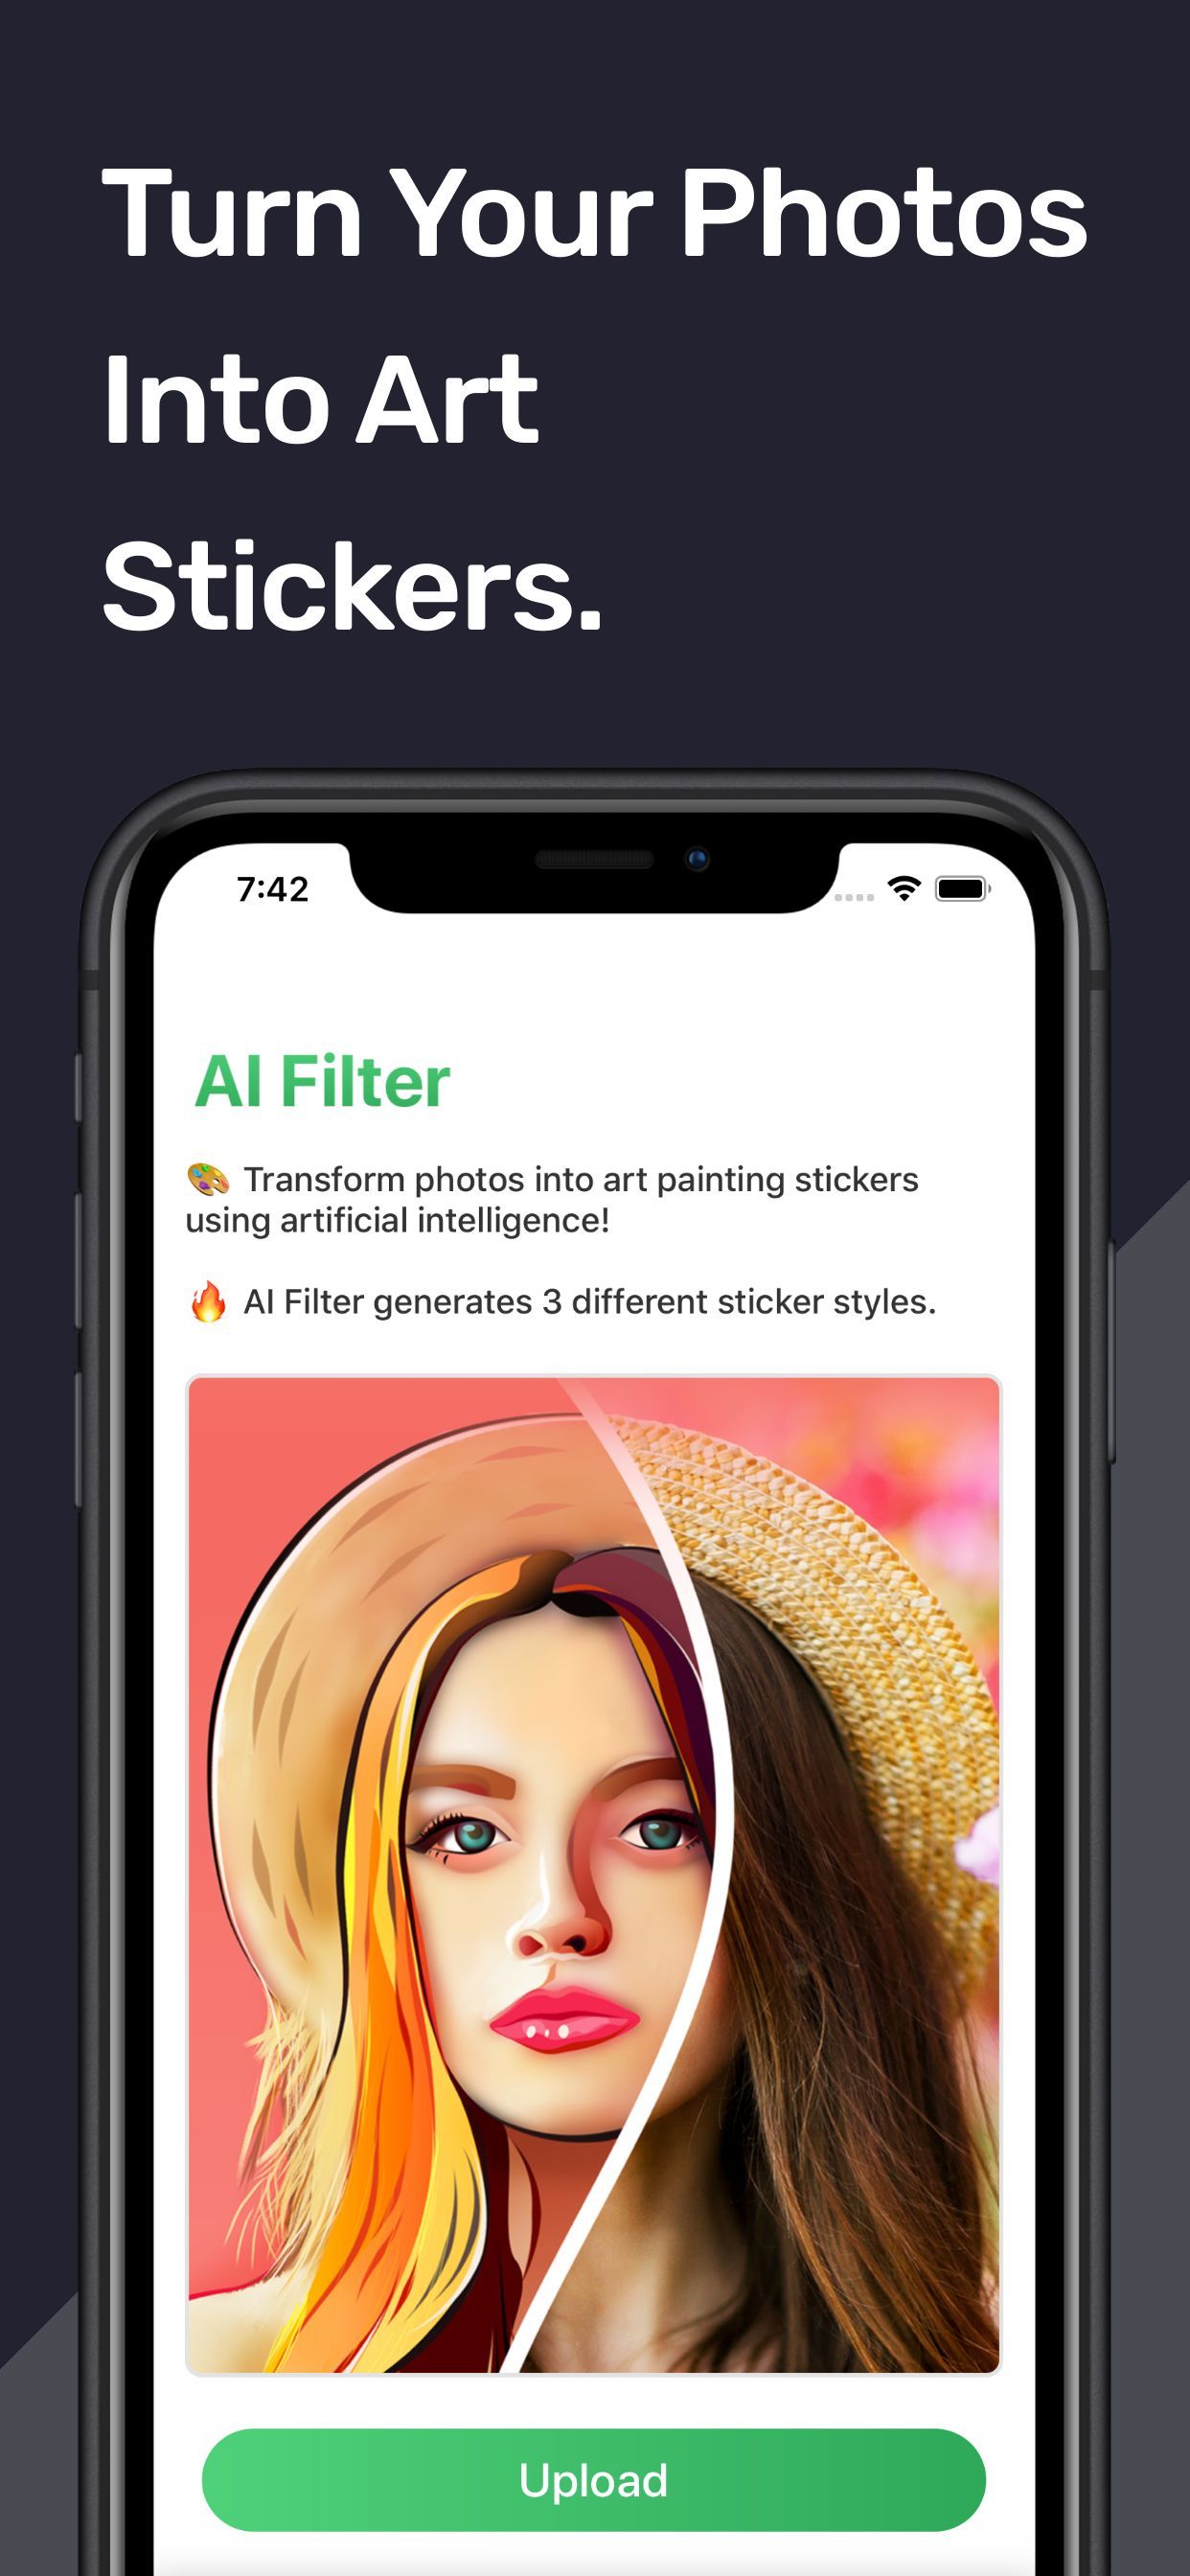 iPhone XS Max Screenshot 23 template. Quickly edit text, colors, images, and more for free.